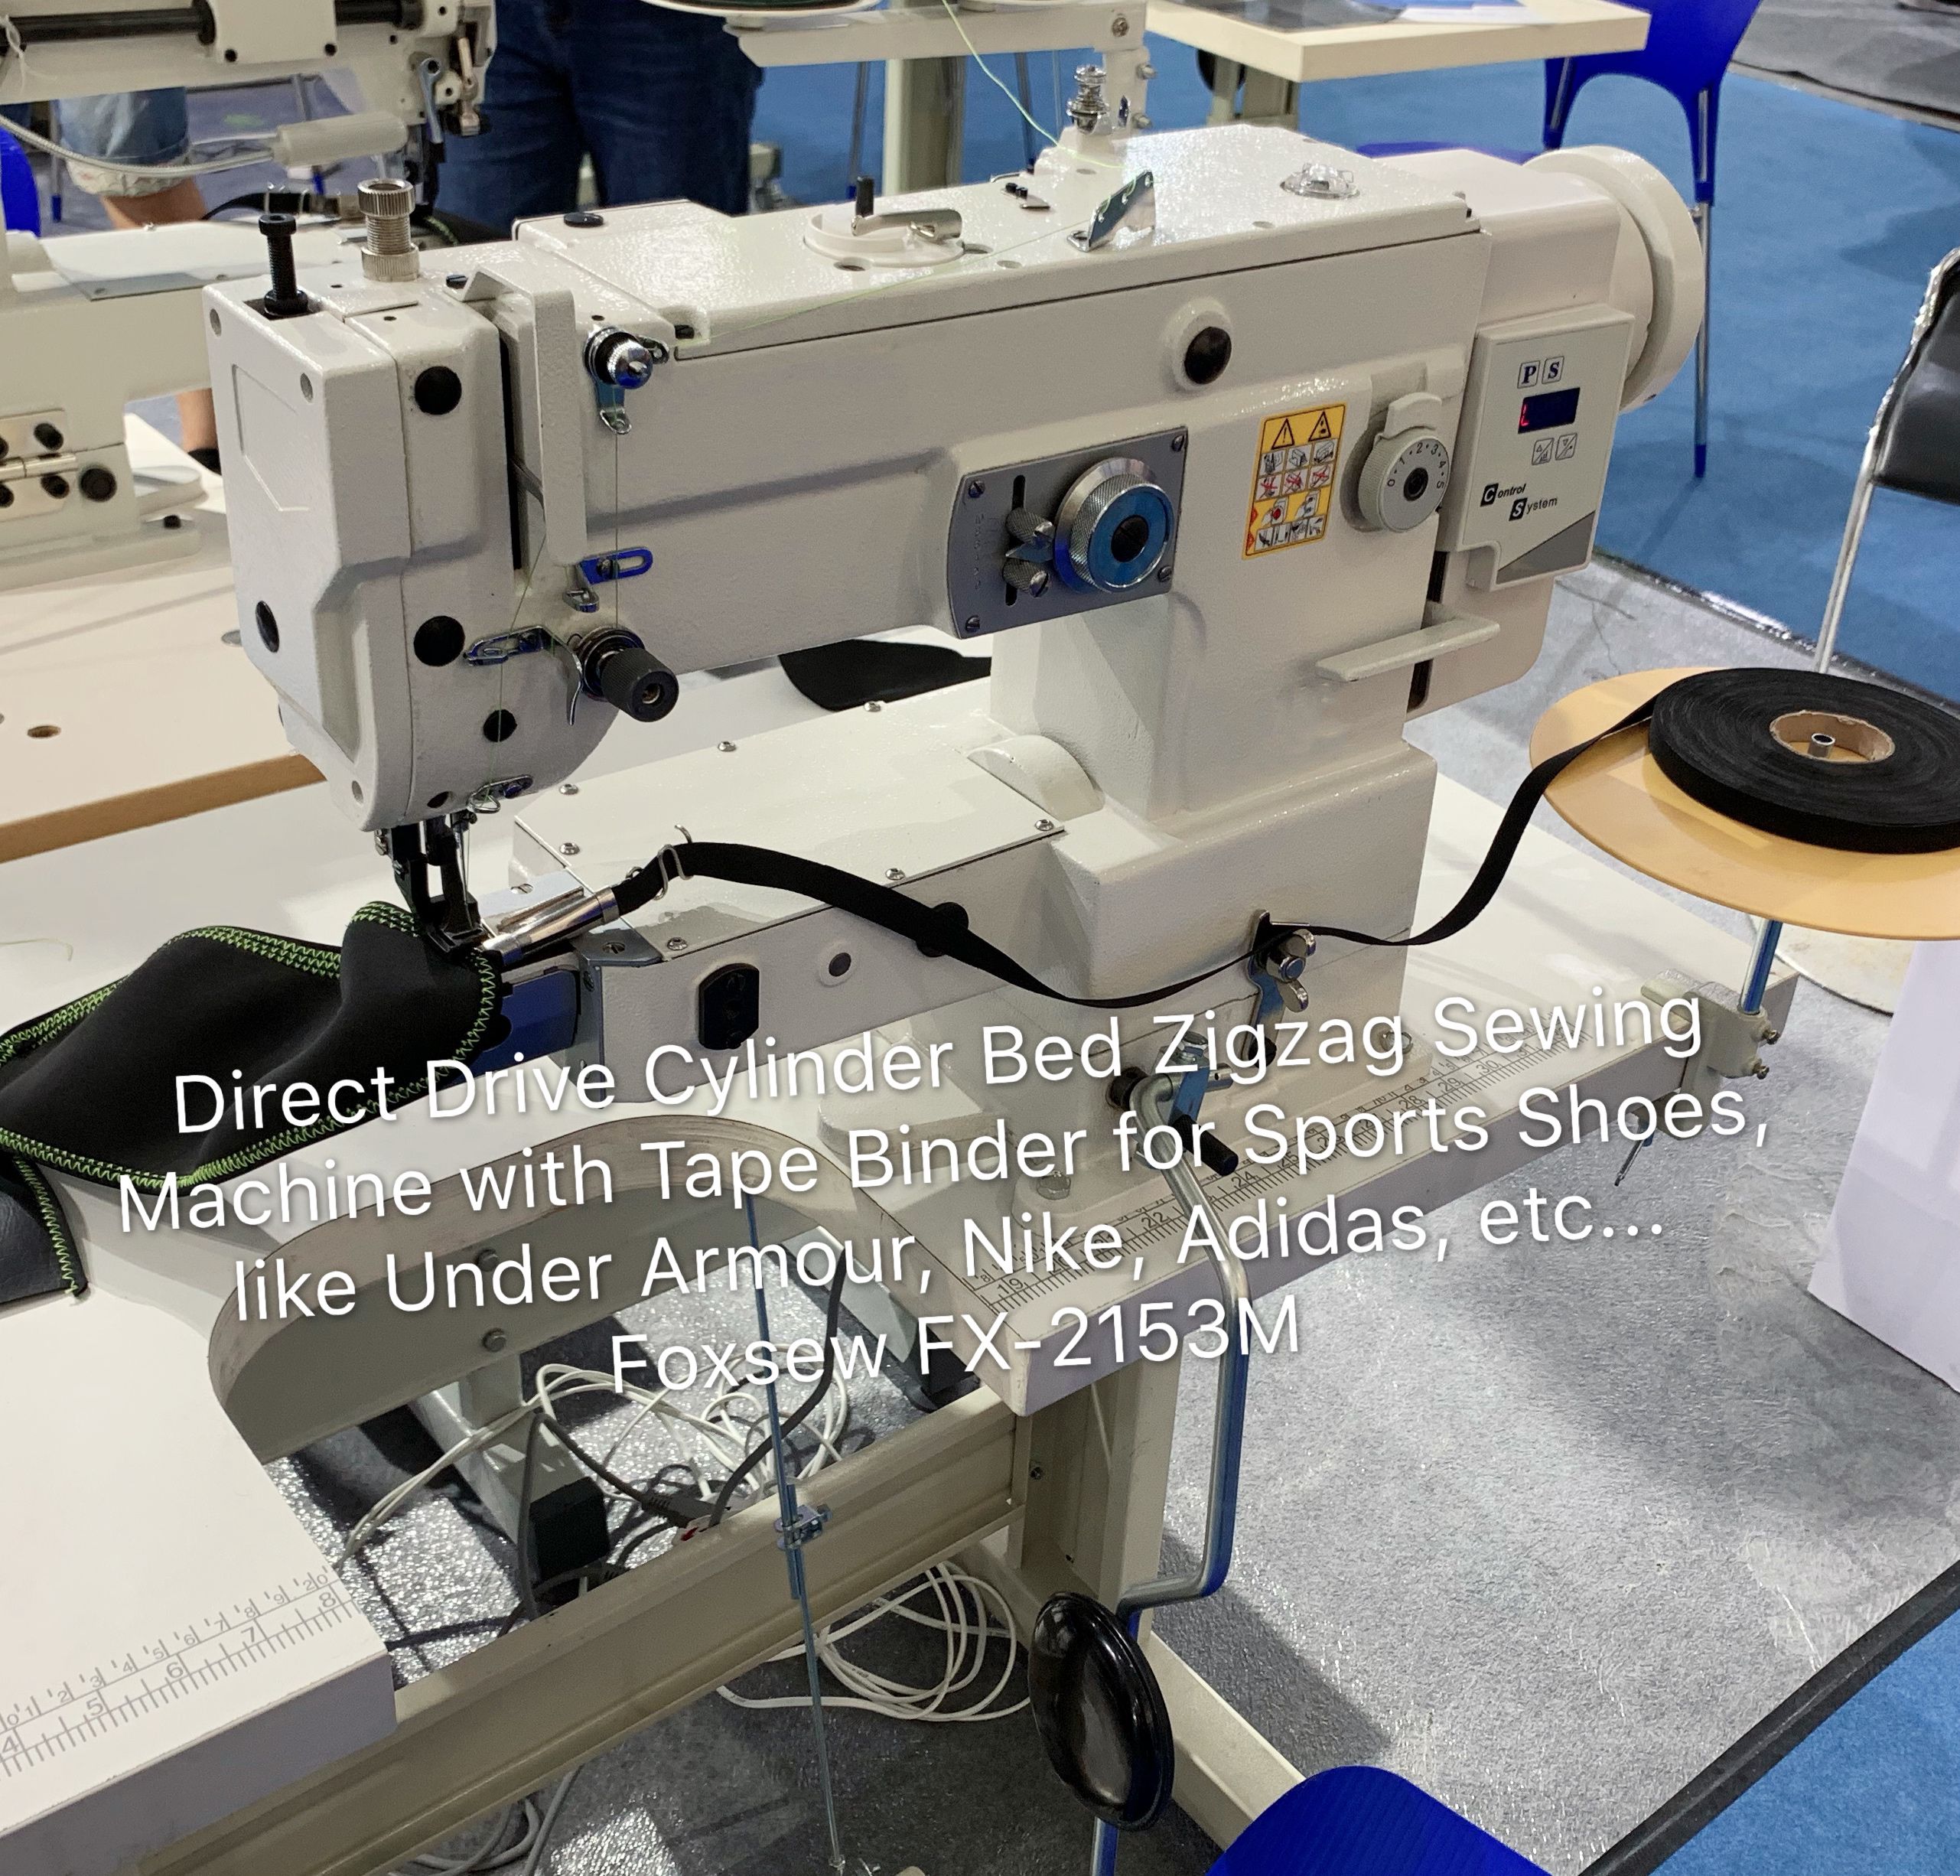 Direct Drive Cylinder Bed Zigzag Sewing Machine For Tape Binding On Sports Shoes Foxsew Fx 2153m 01 003